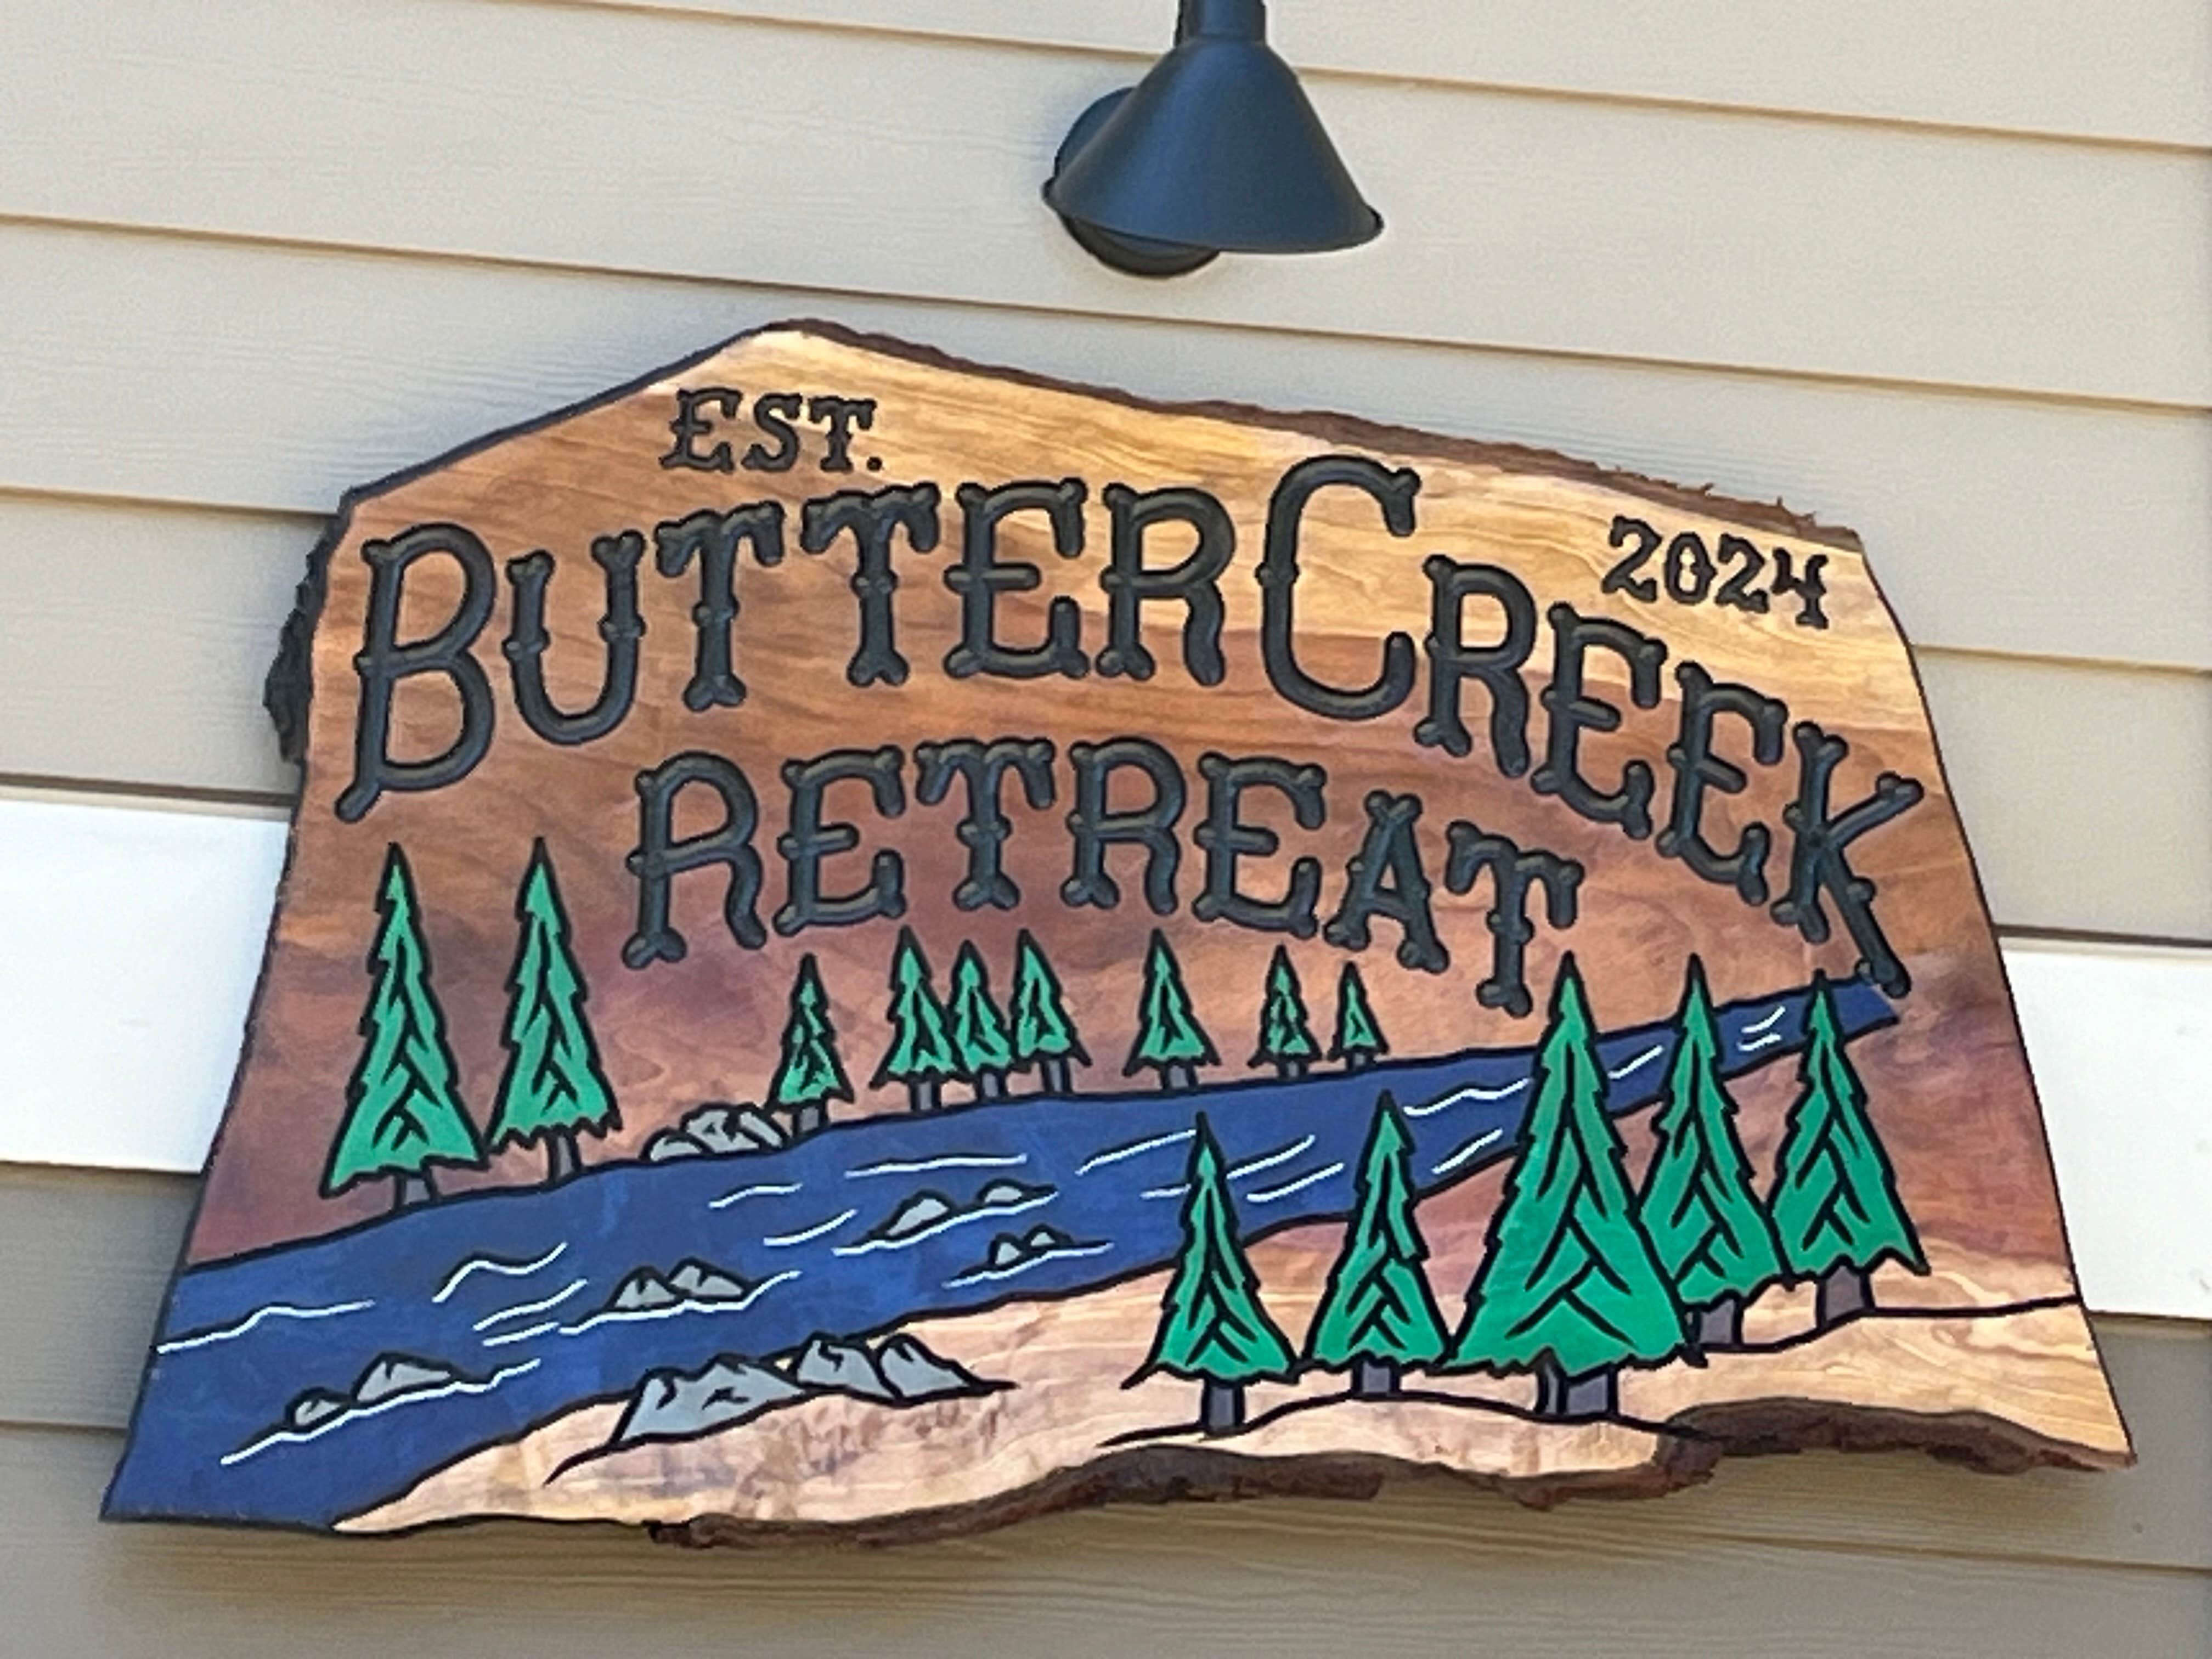 Camper submitted image from New! - Butter Creek Retreat RV Site - 1